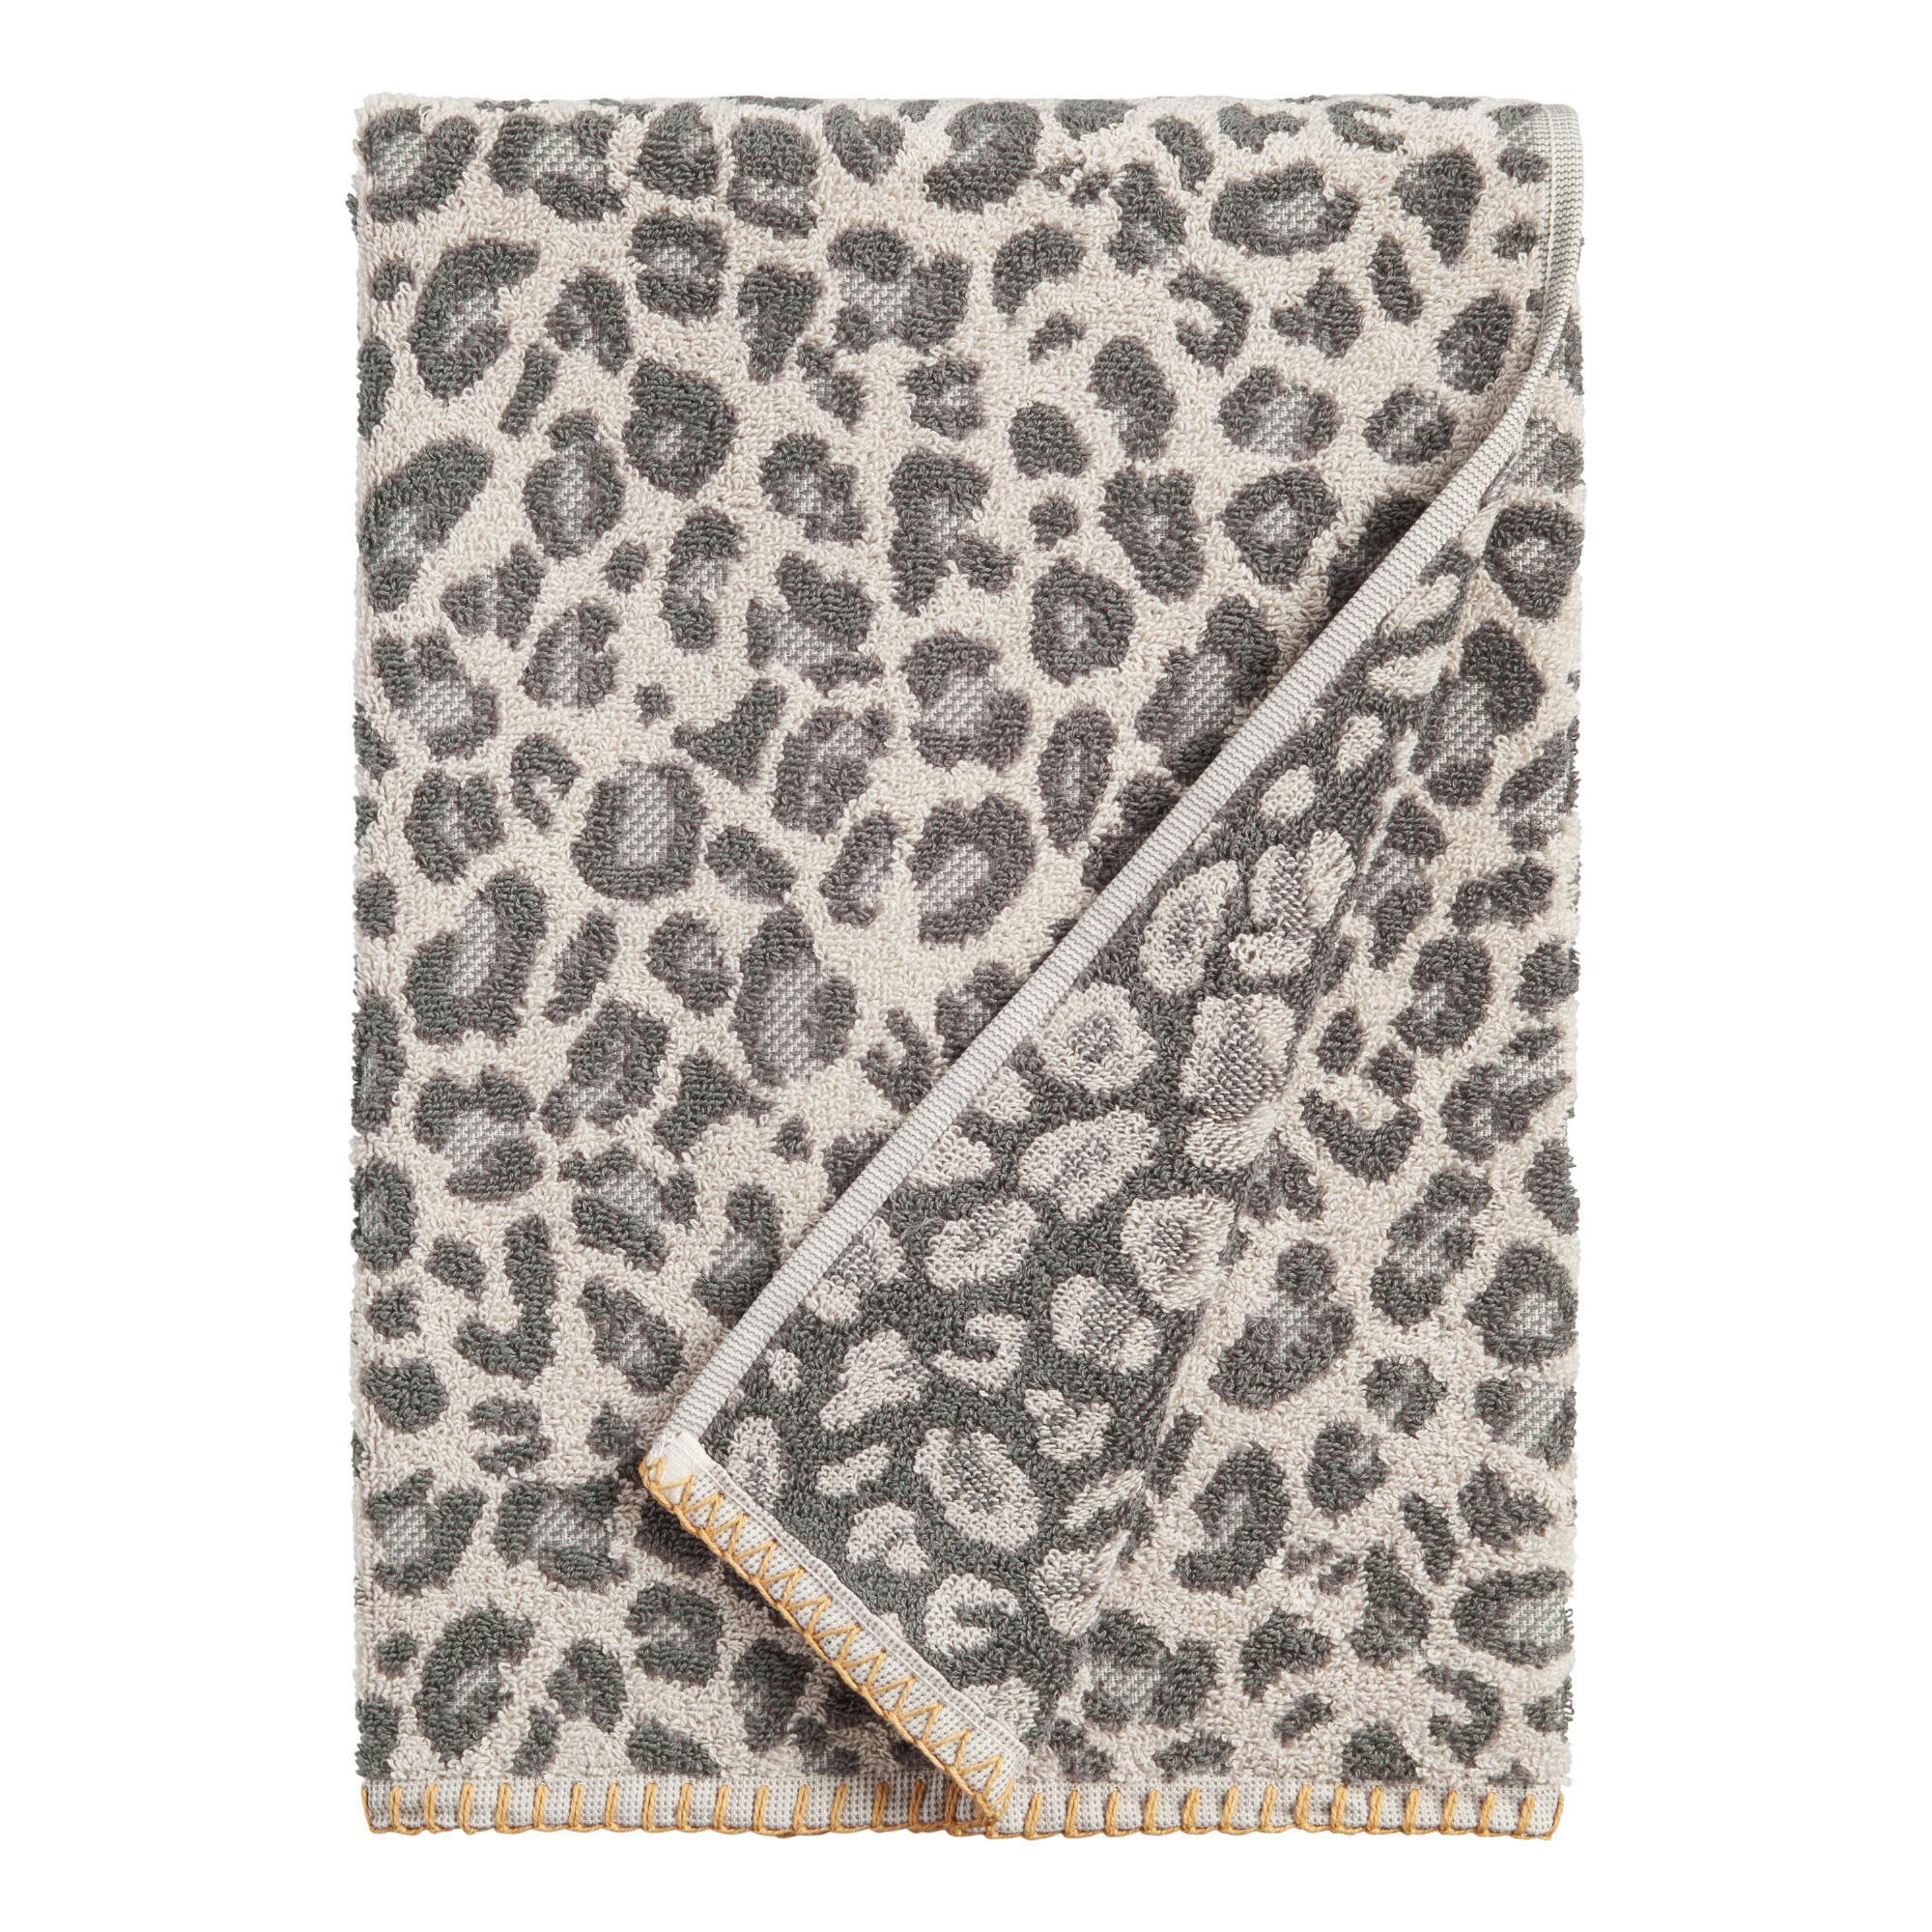 Gray and Ivory Leopard Print Bath Towel by World Market